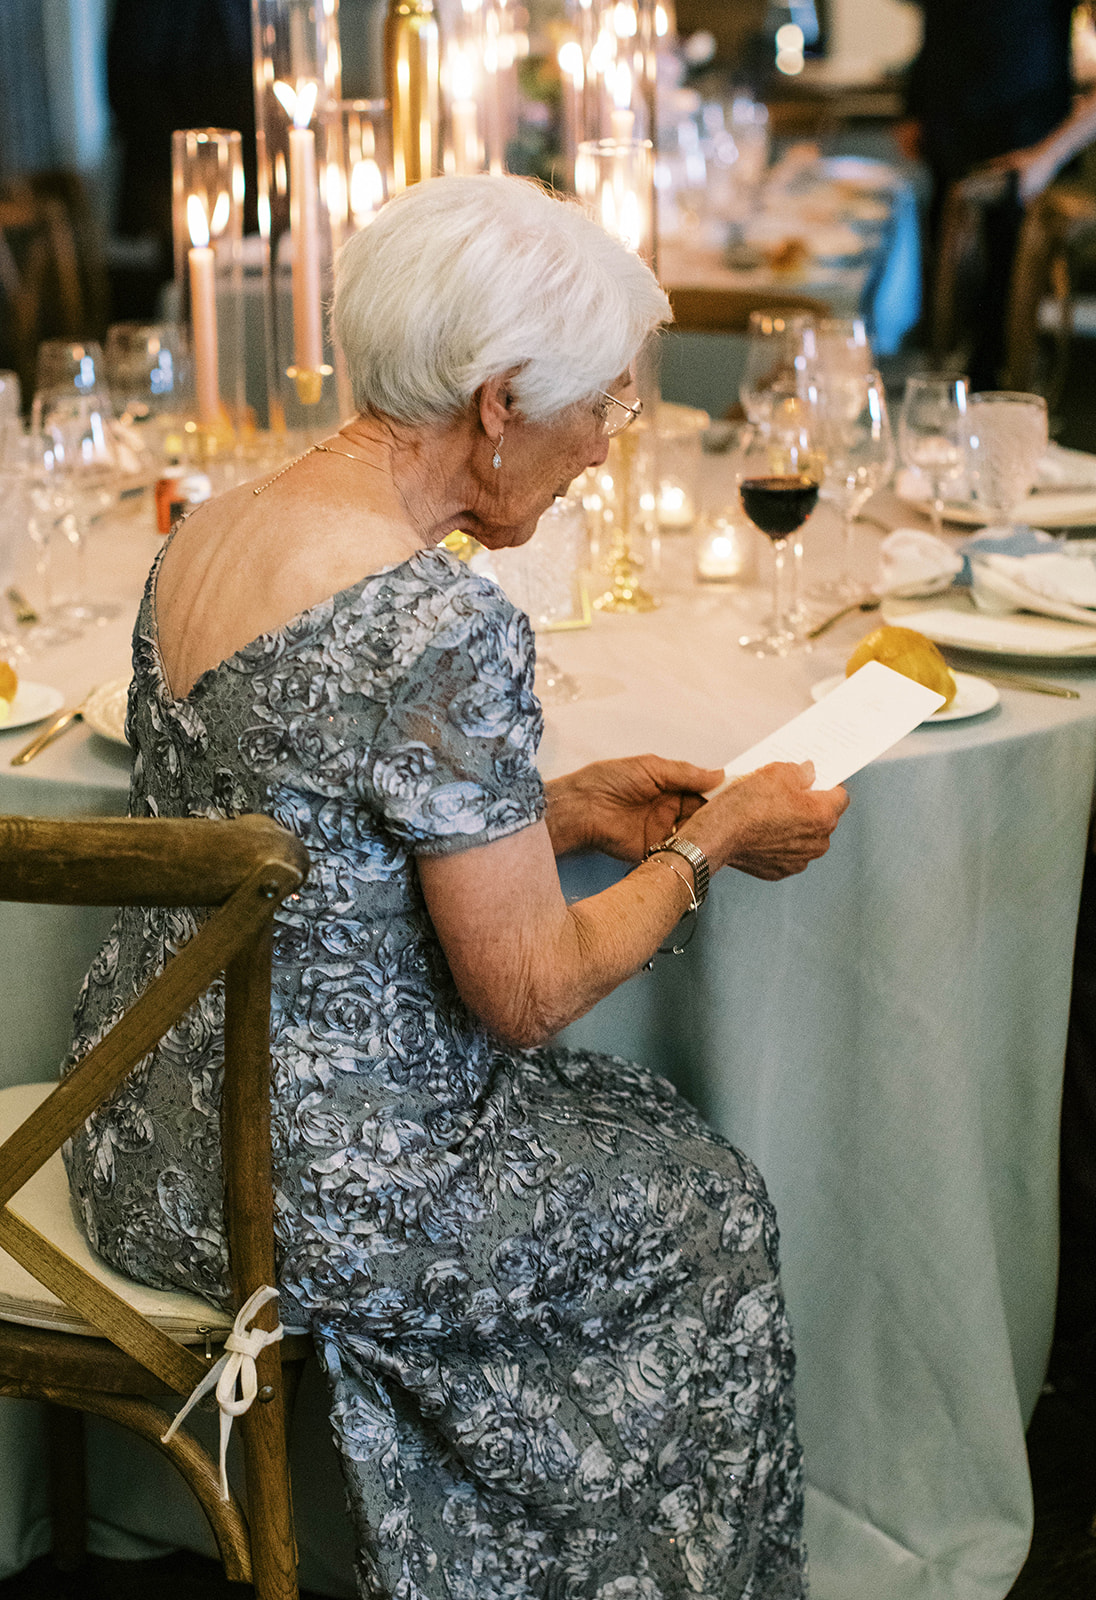 mother of the groom reads the custom wedding menus at this montage deer valley garden theme wedding reception. photo by megan robinson photo